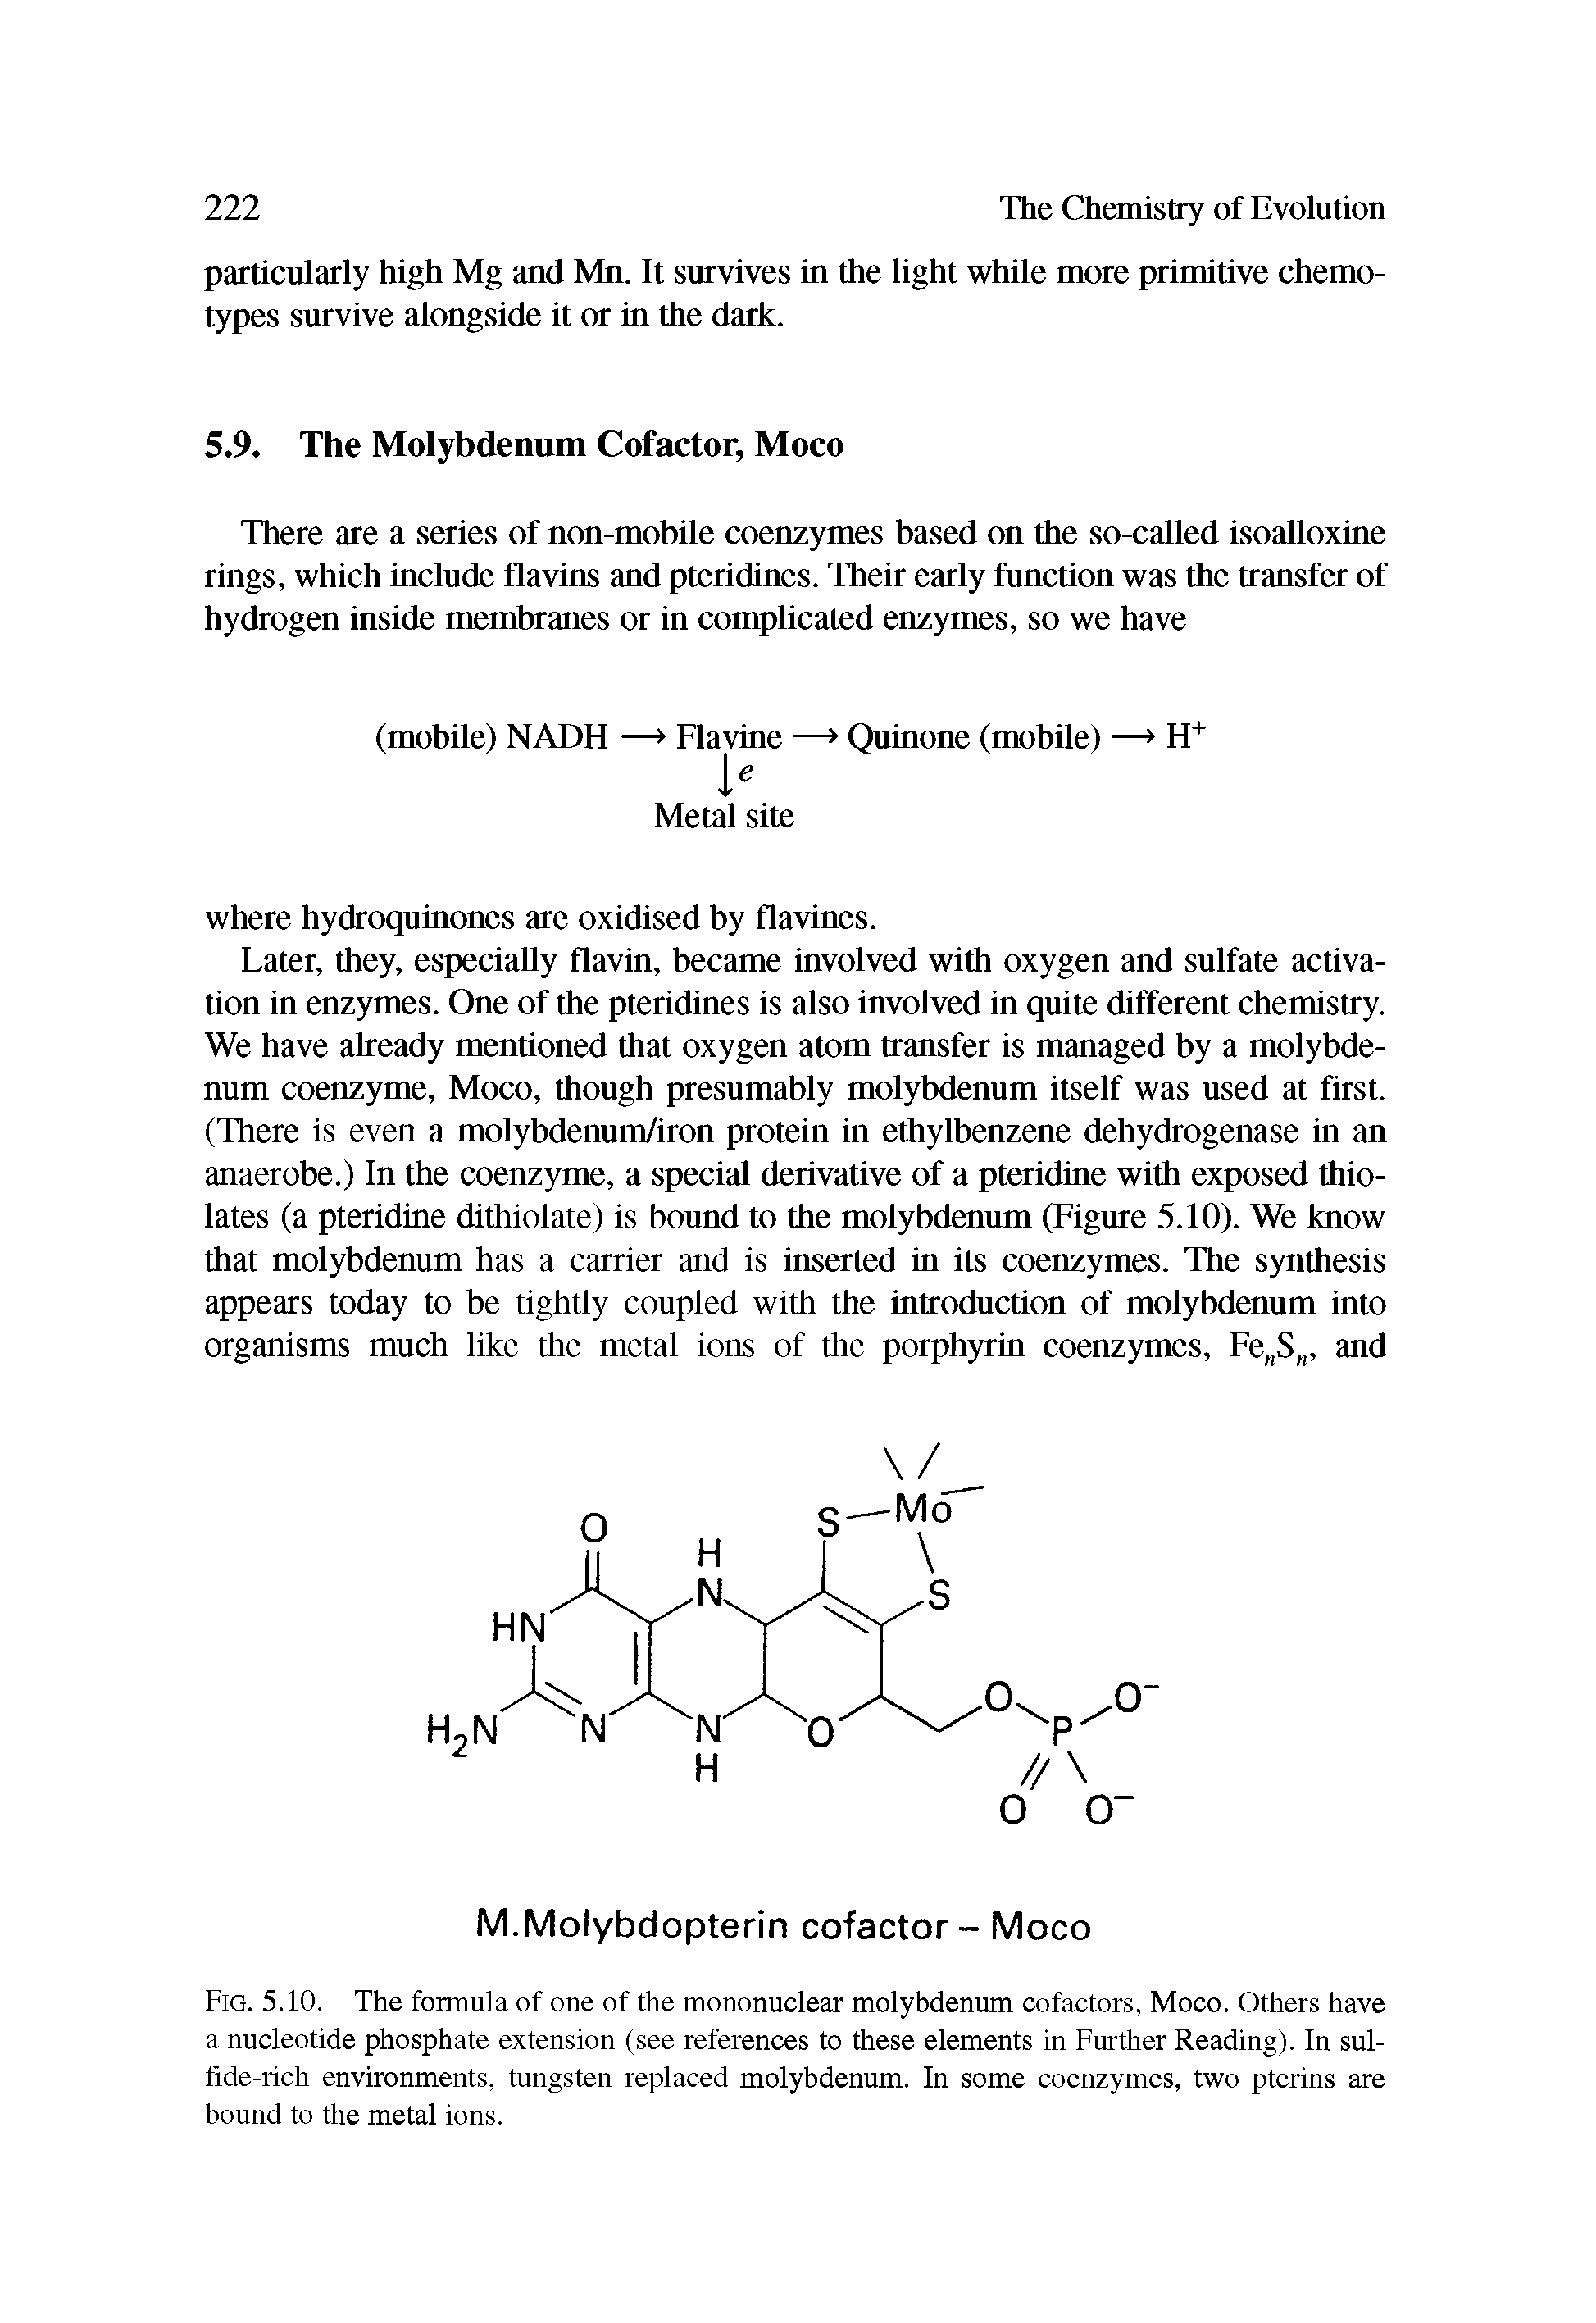 Fig. 5.10. The formula of one of the mononuclear molybdenum cofactors, Moco. Others have a nucleotide phosphate extension (see references to these elements in Further Reading). In sulfide-rich environments, tungsten replaced molybdenum. In some coenzymes, two pterins are bound to the metal ions.